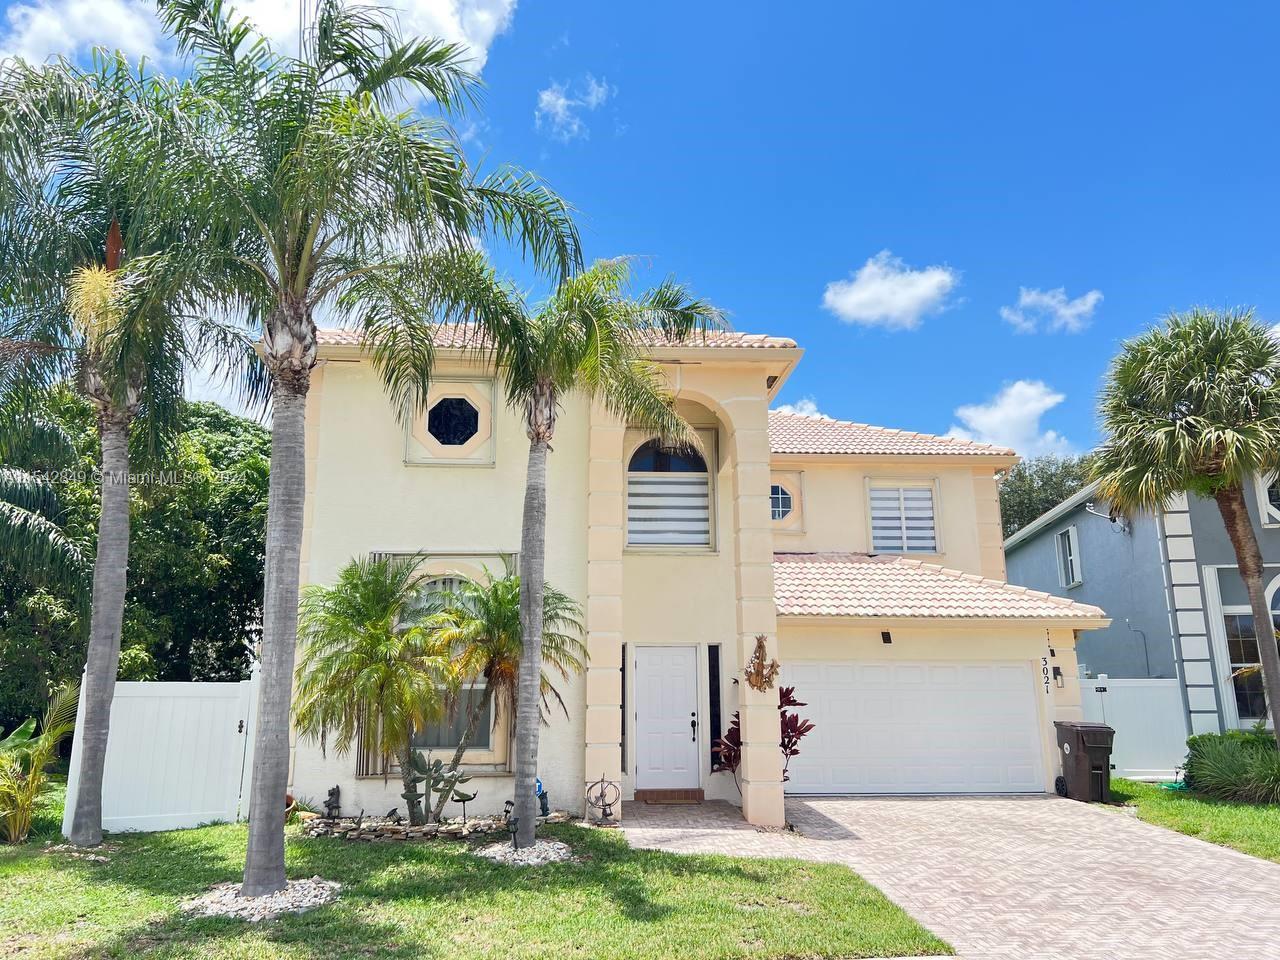 Property for Sale at 3021 El Camino Real, West Palm Beach, Palm Beach County, Florida - Bedrooms: 5 
Bathrooms: 4  - $683,400